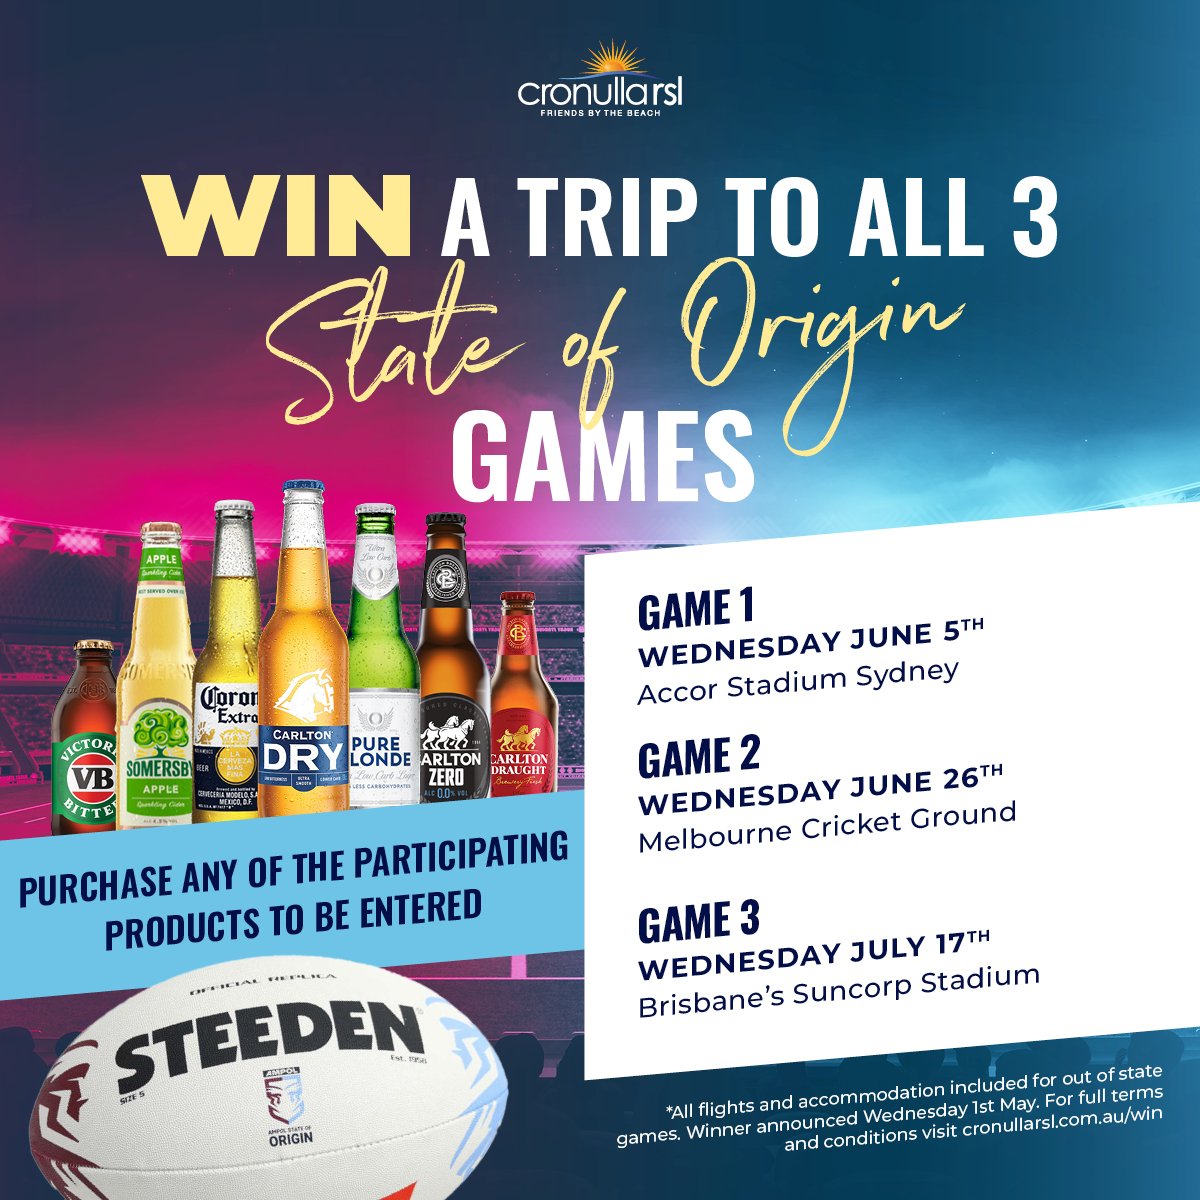 The dates are coming close! This is now your chance to win a trip to ALL State of Origin Games! Purchase any of our featured items to enter the draw for a chance to win a trip. 🏉🌟 

Enjoy included flights and accommodations for out-of-state matches